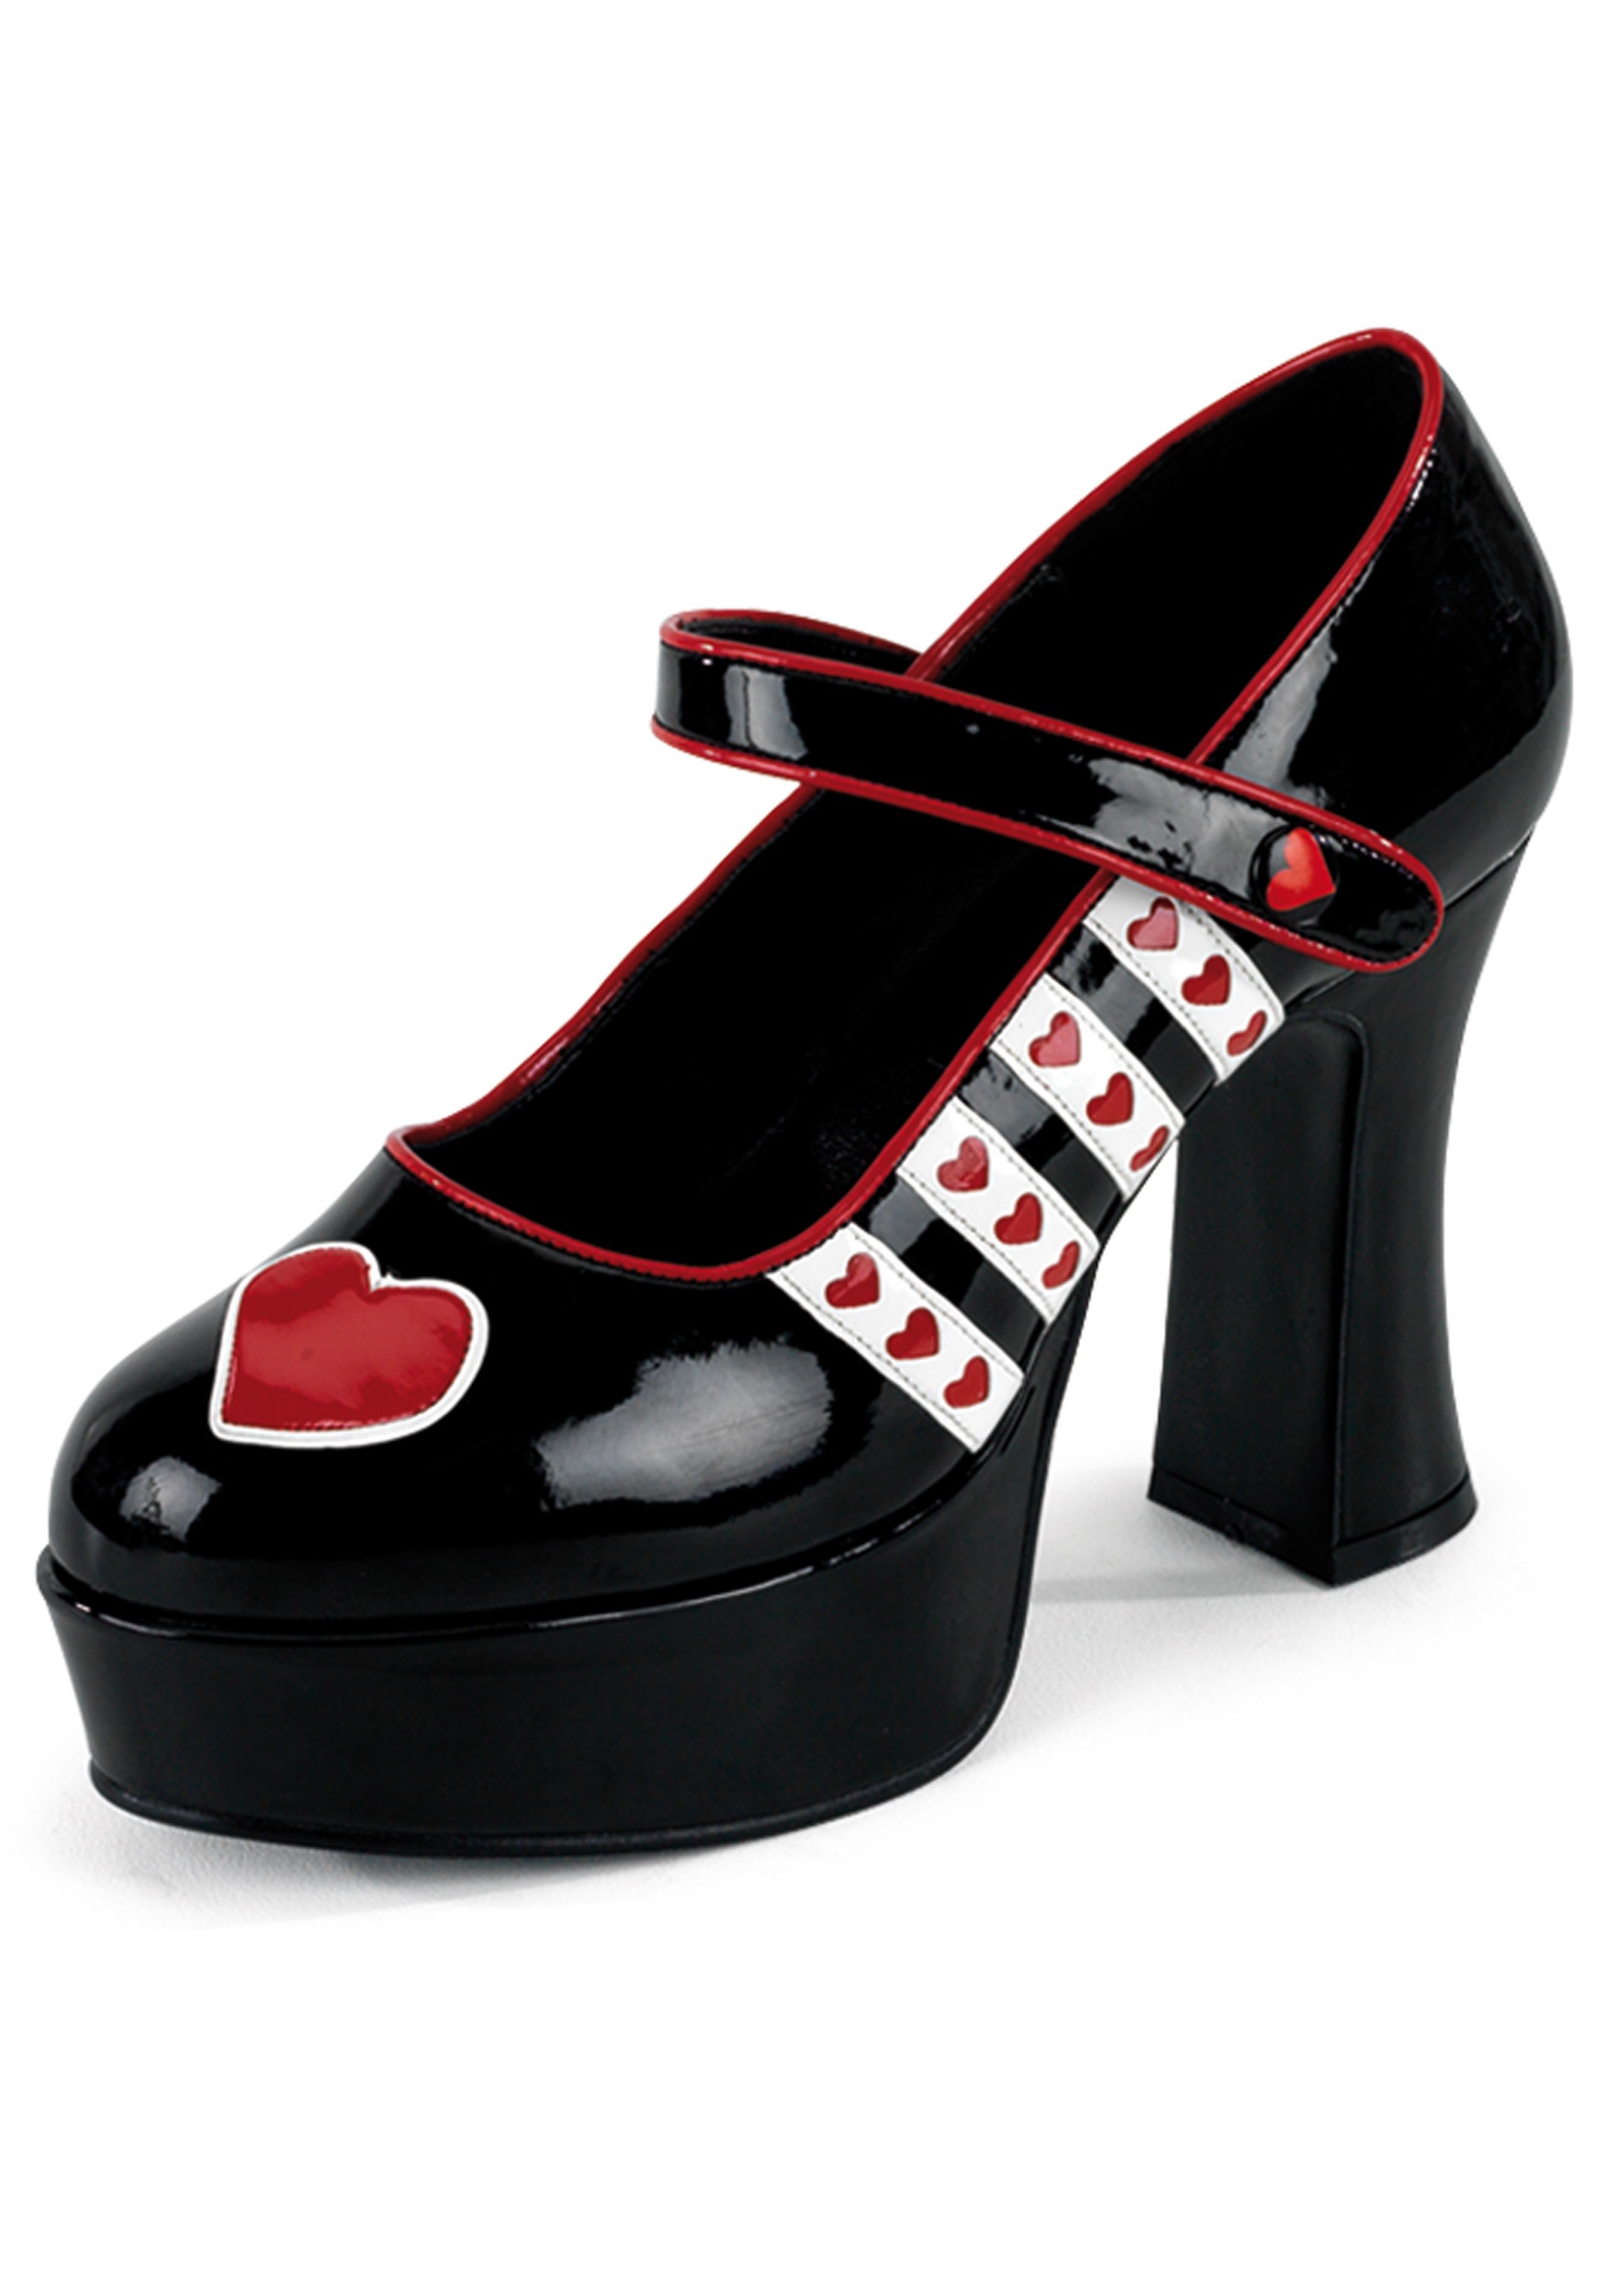 Image of Queen of Hearts Shoes ID PLQUE55-8